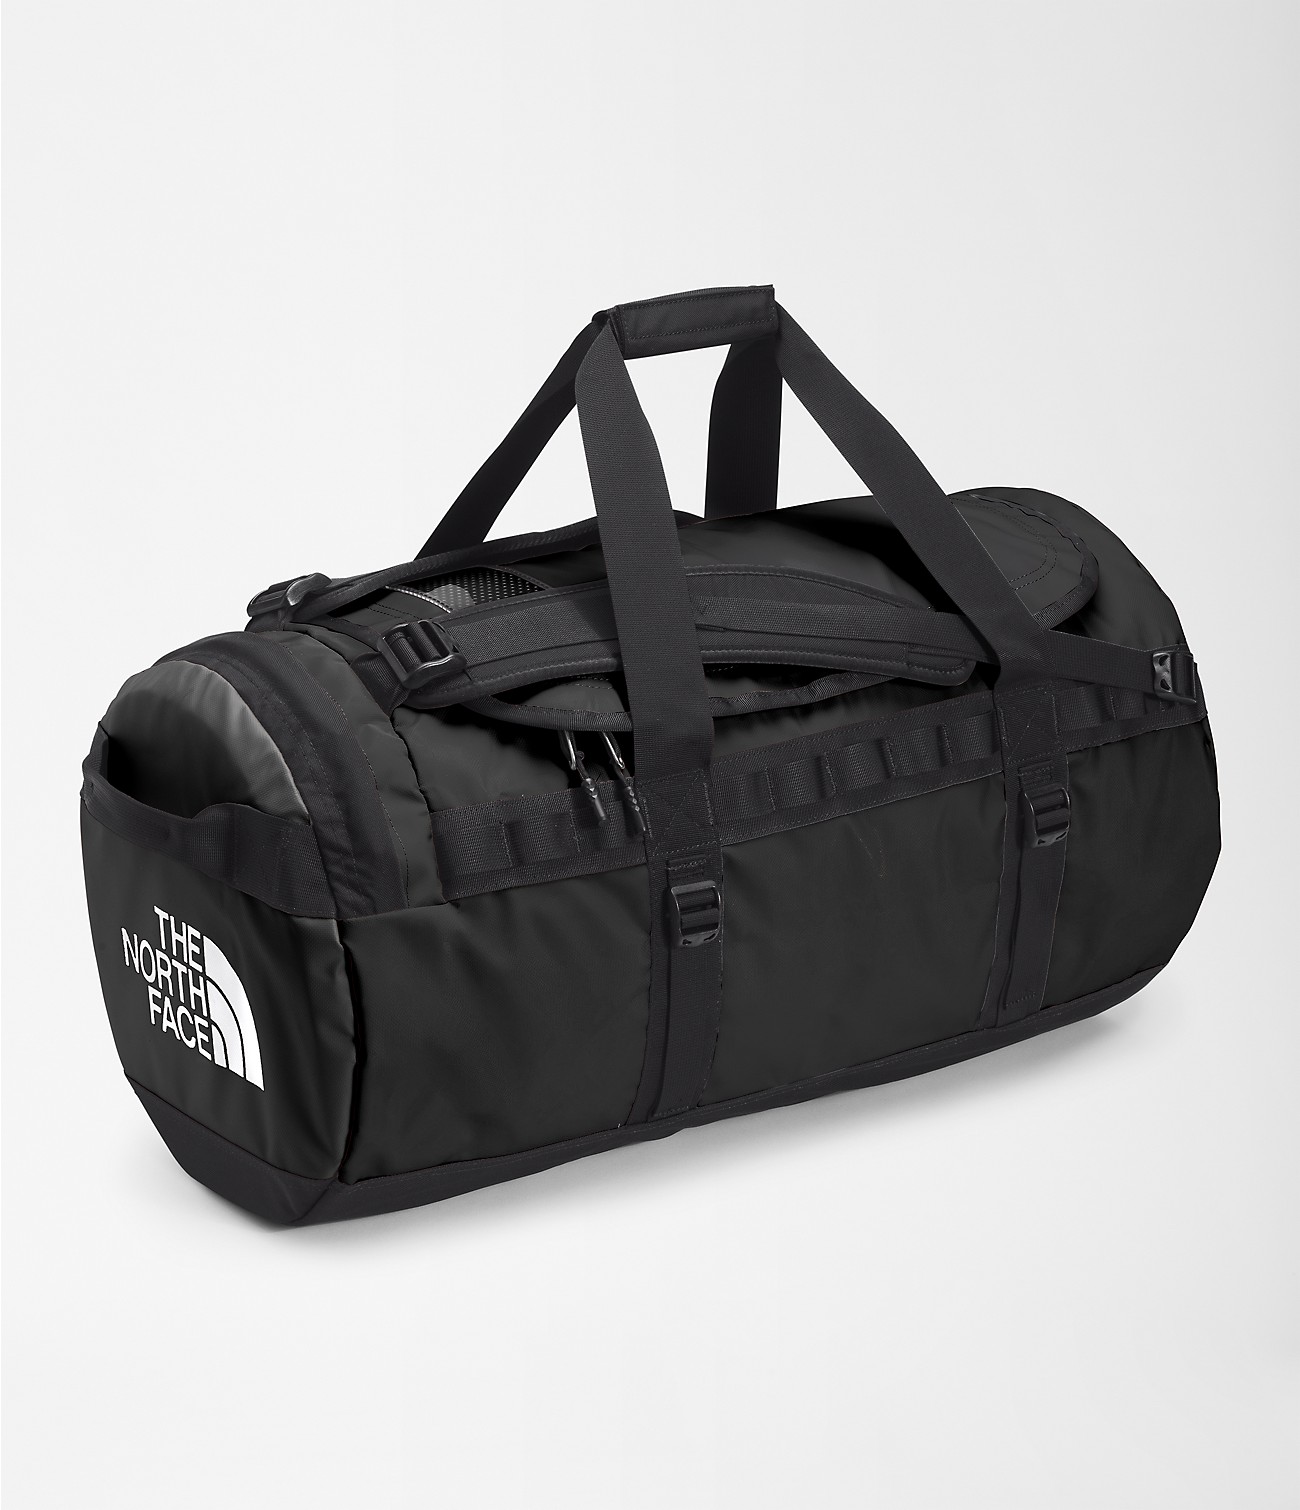 Unlock Wilderness' choice in the Swiss Gear Vs North Face comparison, the Base Camp Duffel by The North Face